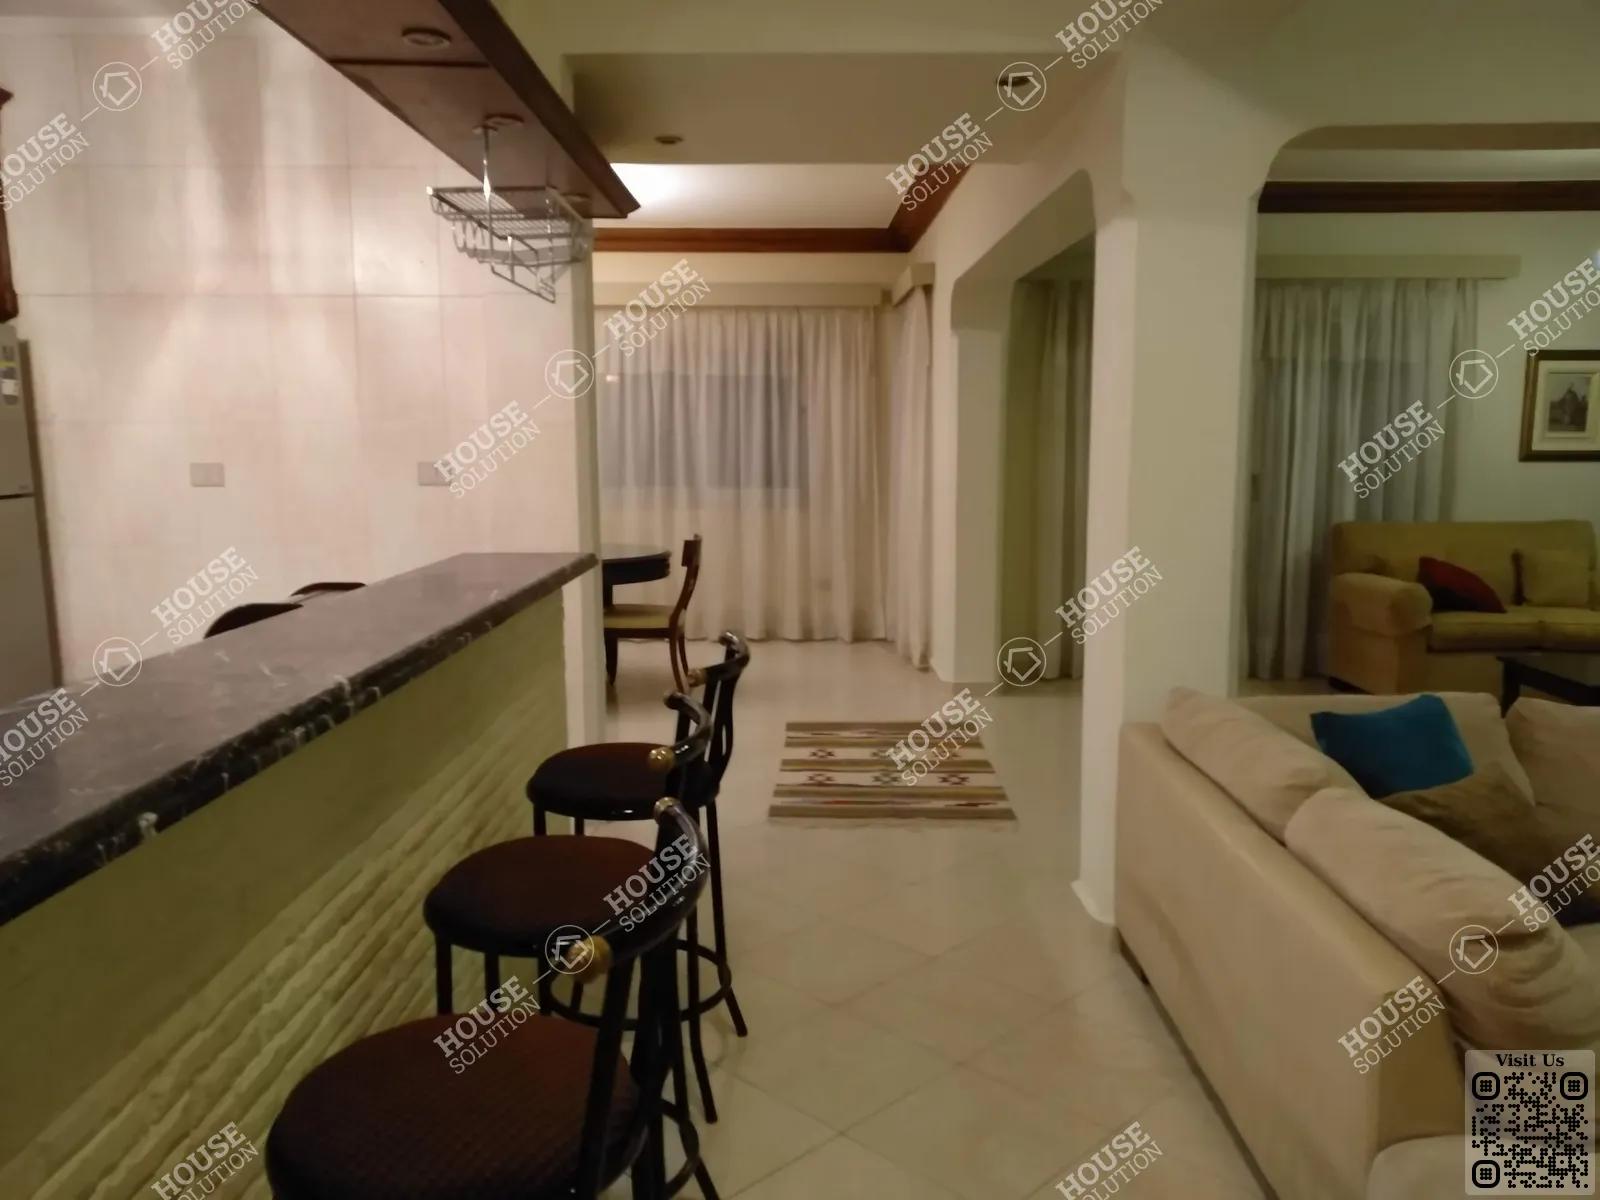 RECEPTION  @ Apartments For Rent In Maadi Maadi Sarayat Area: 185 m² consists of 3 Bedrooms 2 Bathrooms Modern furnished 5 stars #5461-2